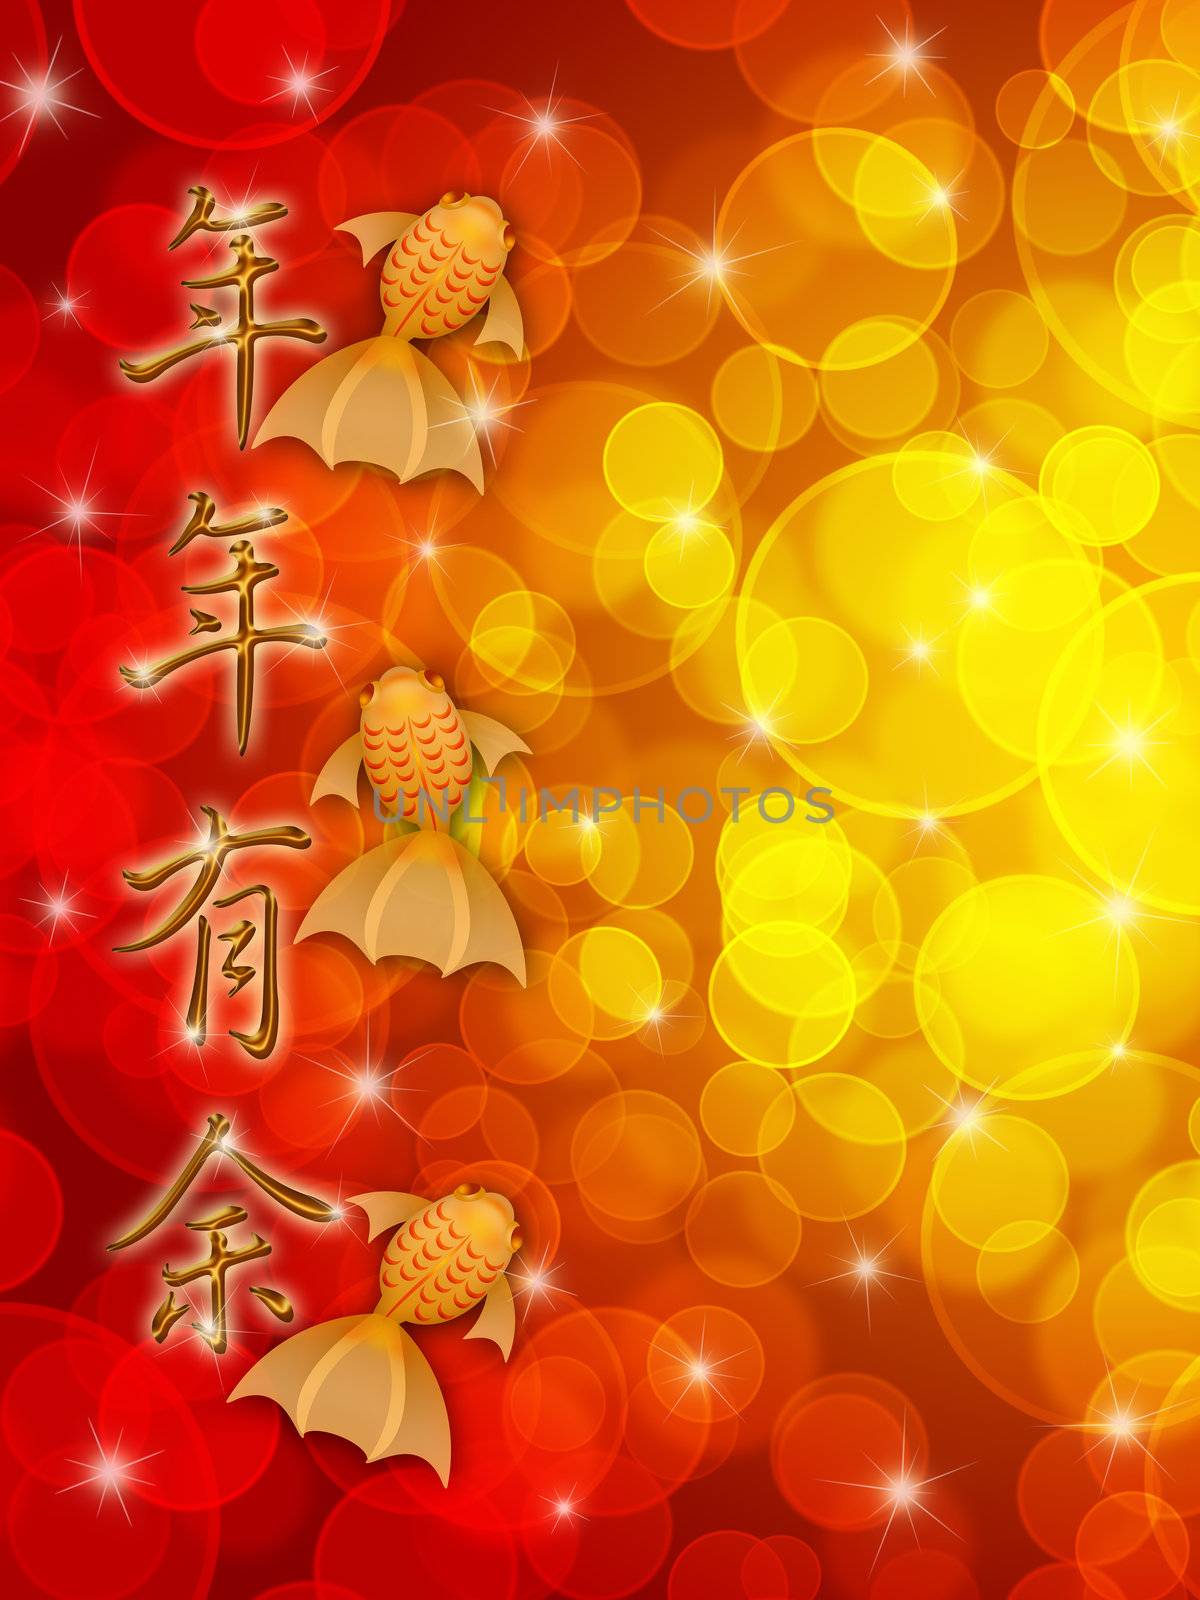 Chinese New Year Three Fancy Goldfish with Calligraphy Text Wishing Abundance Year After Year Illustration